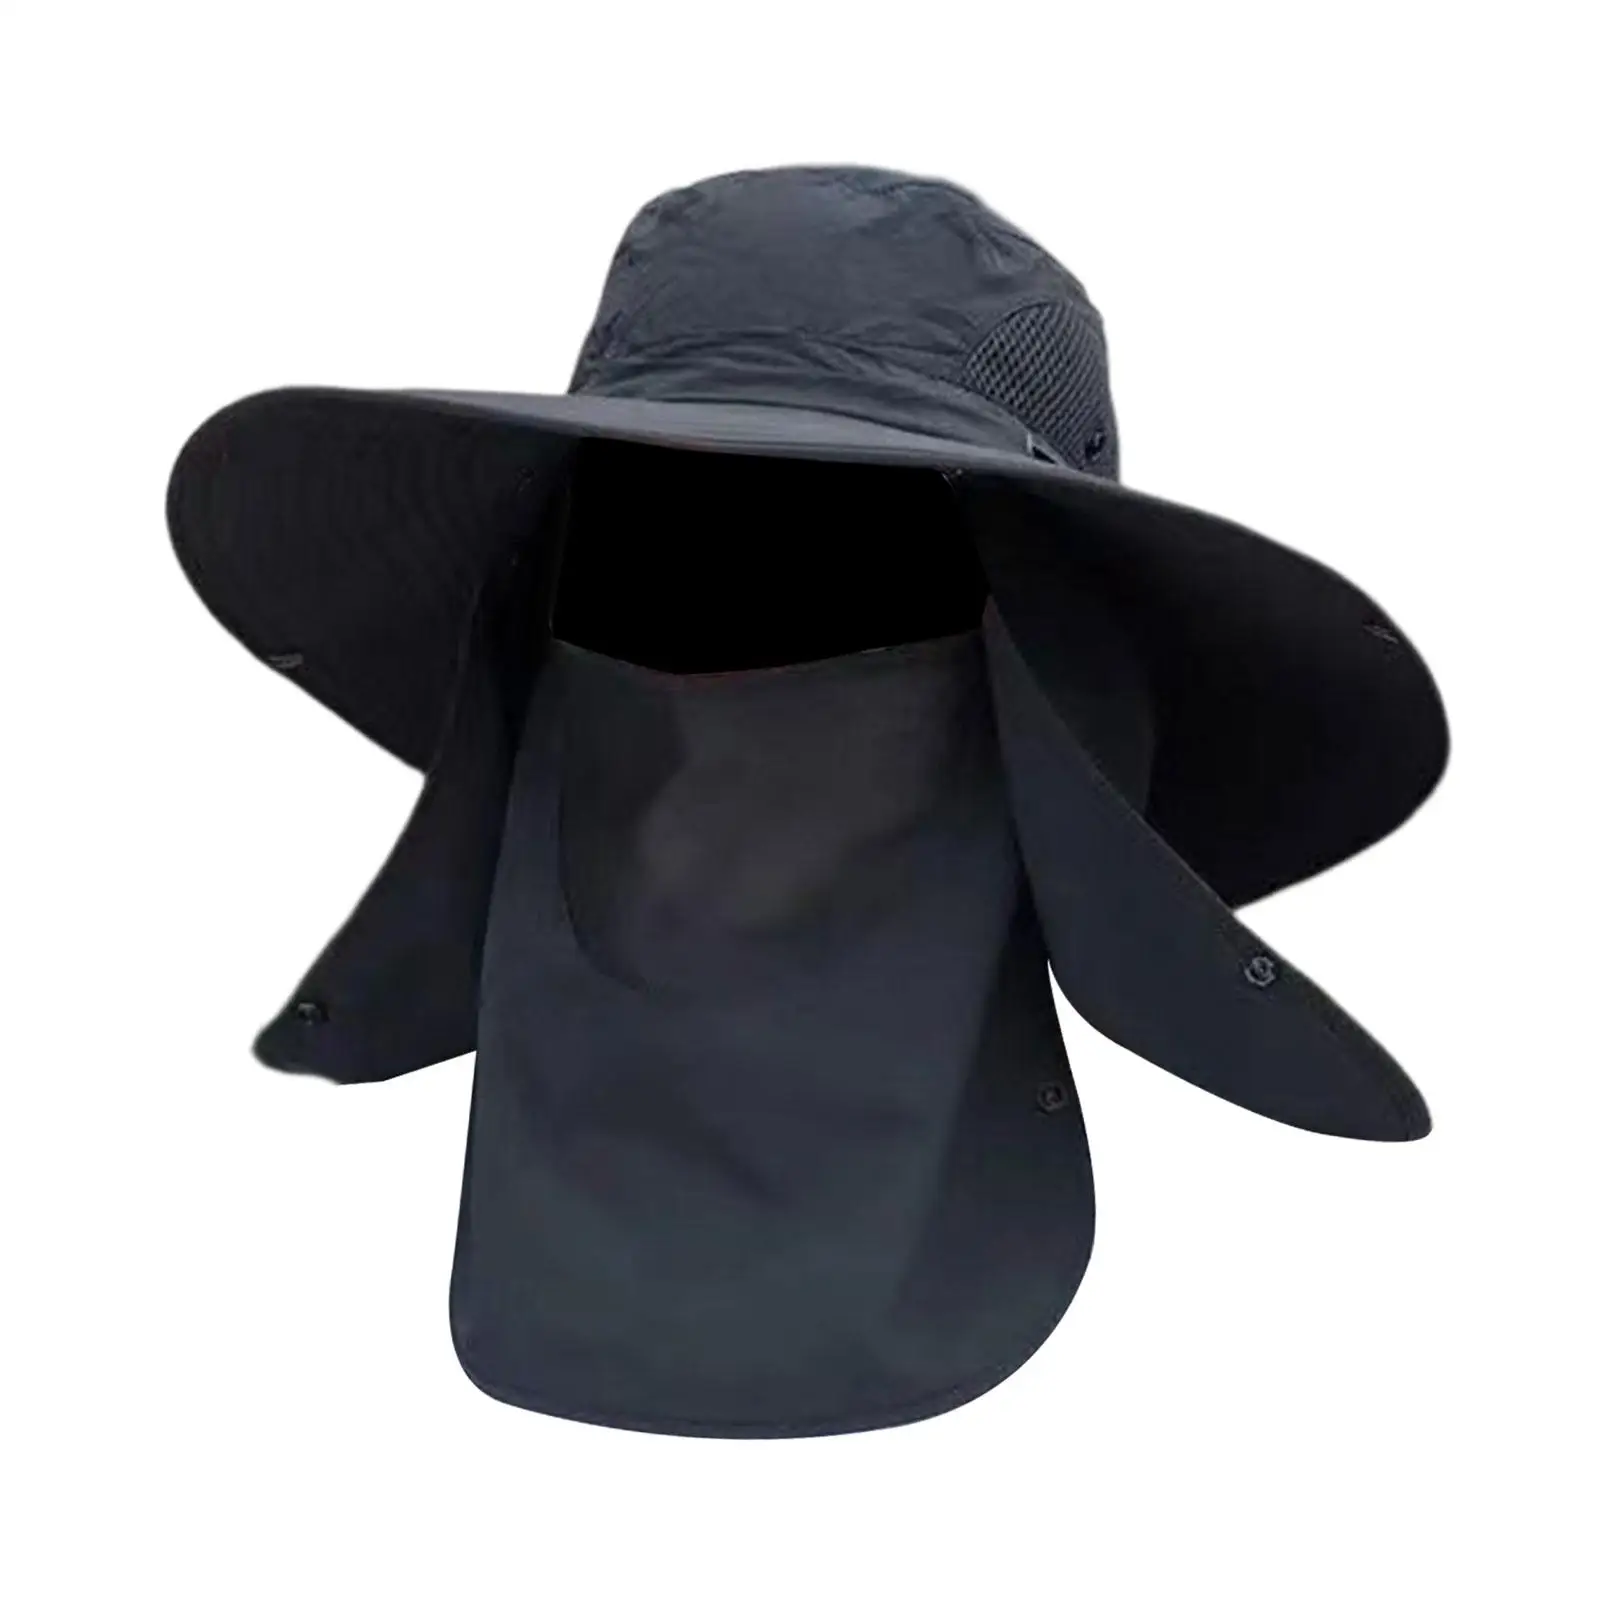 with Detachable Face Neck Flap Cover Visor Wide Brims Sun Protection Fishing Hat Summer Hiking Gardening Beach Travel